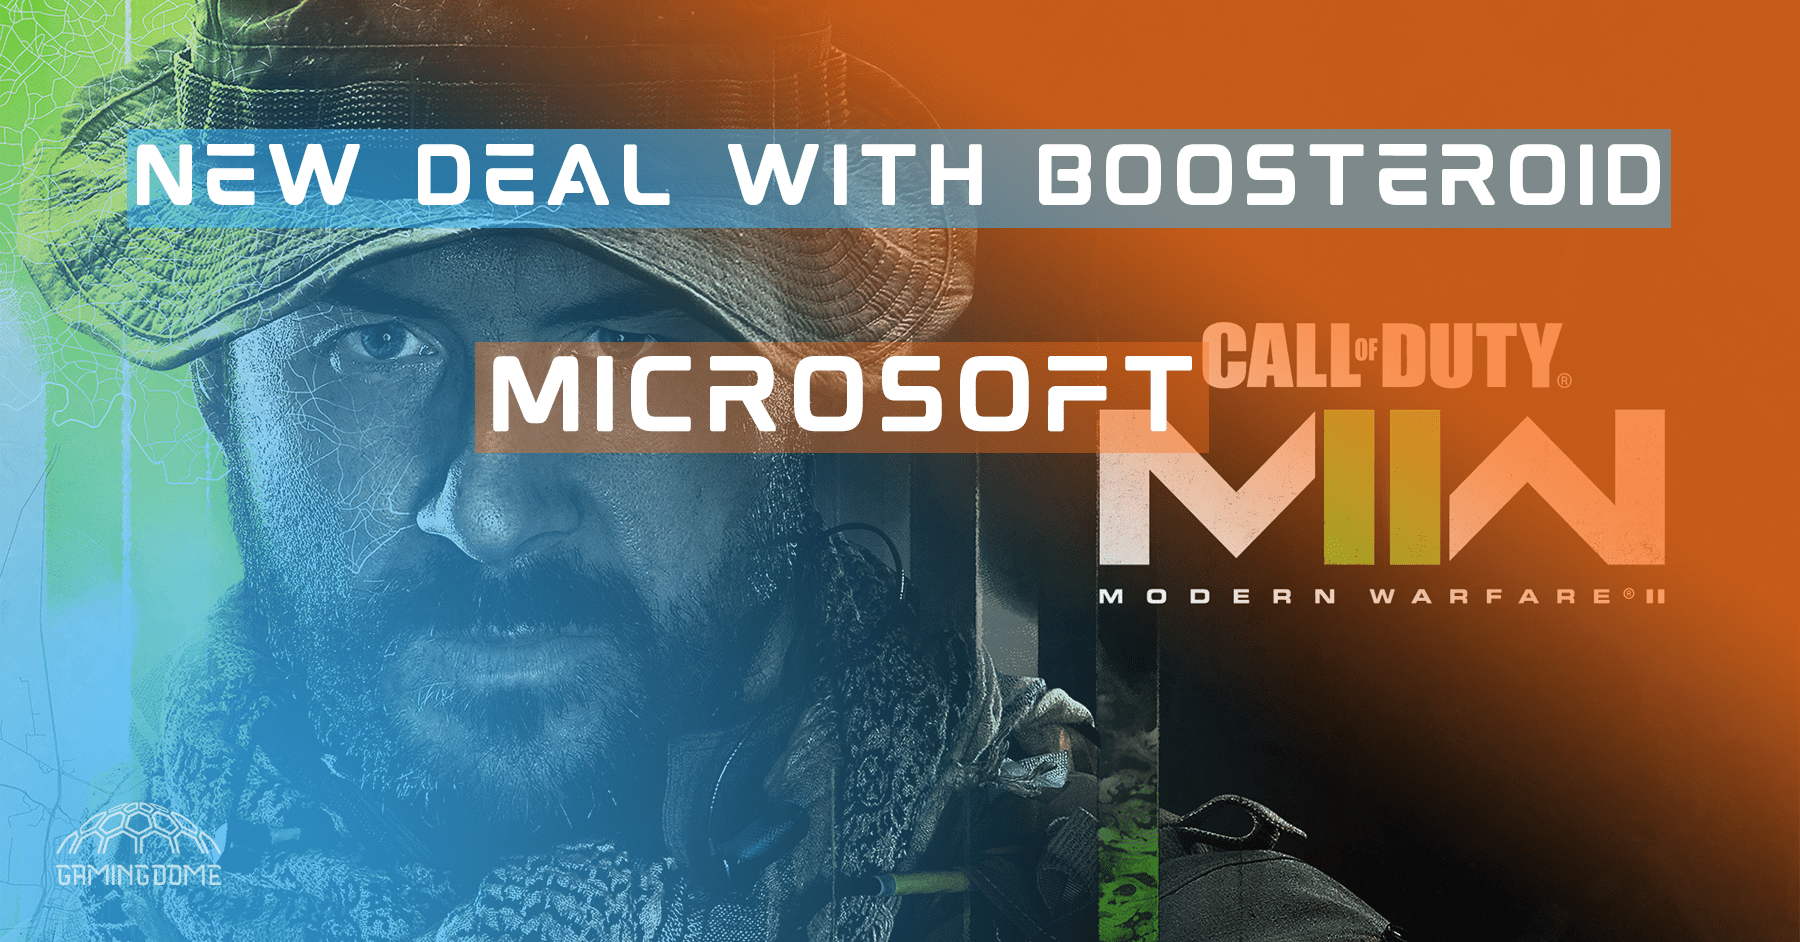 Call of Duty Comes to Microsoft: New Deal with Boosteroid